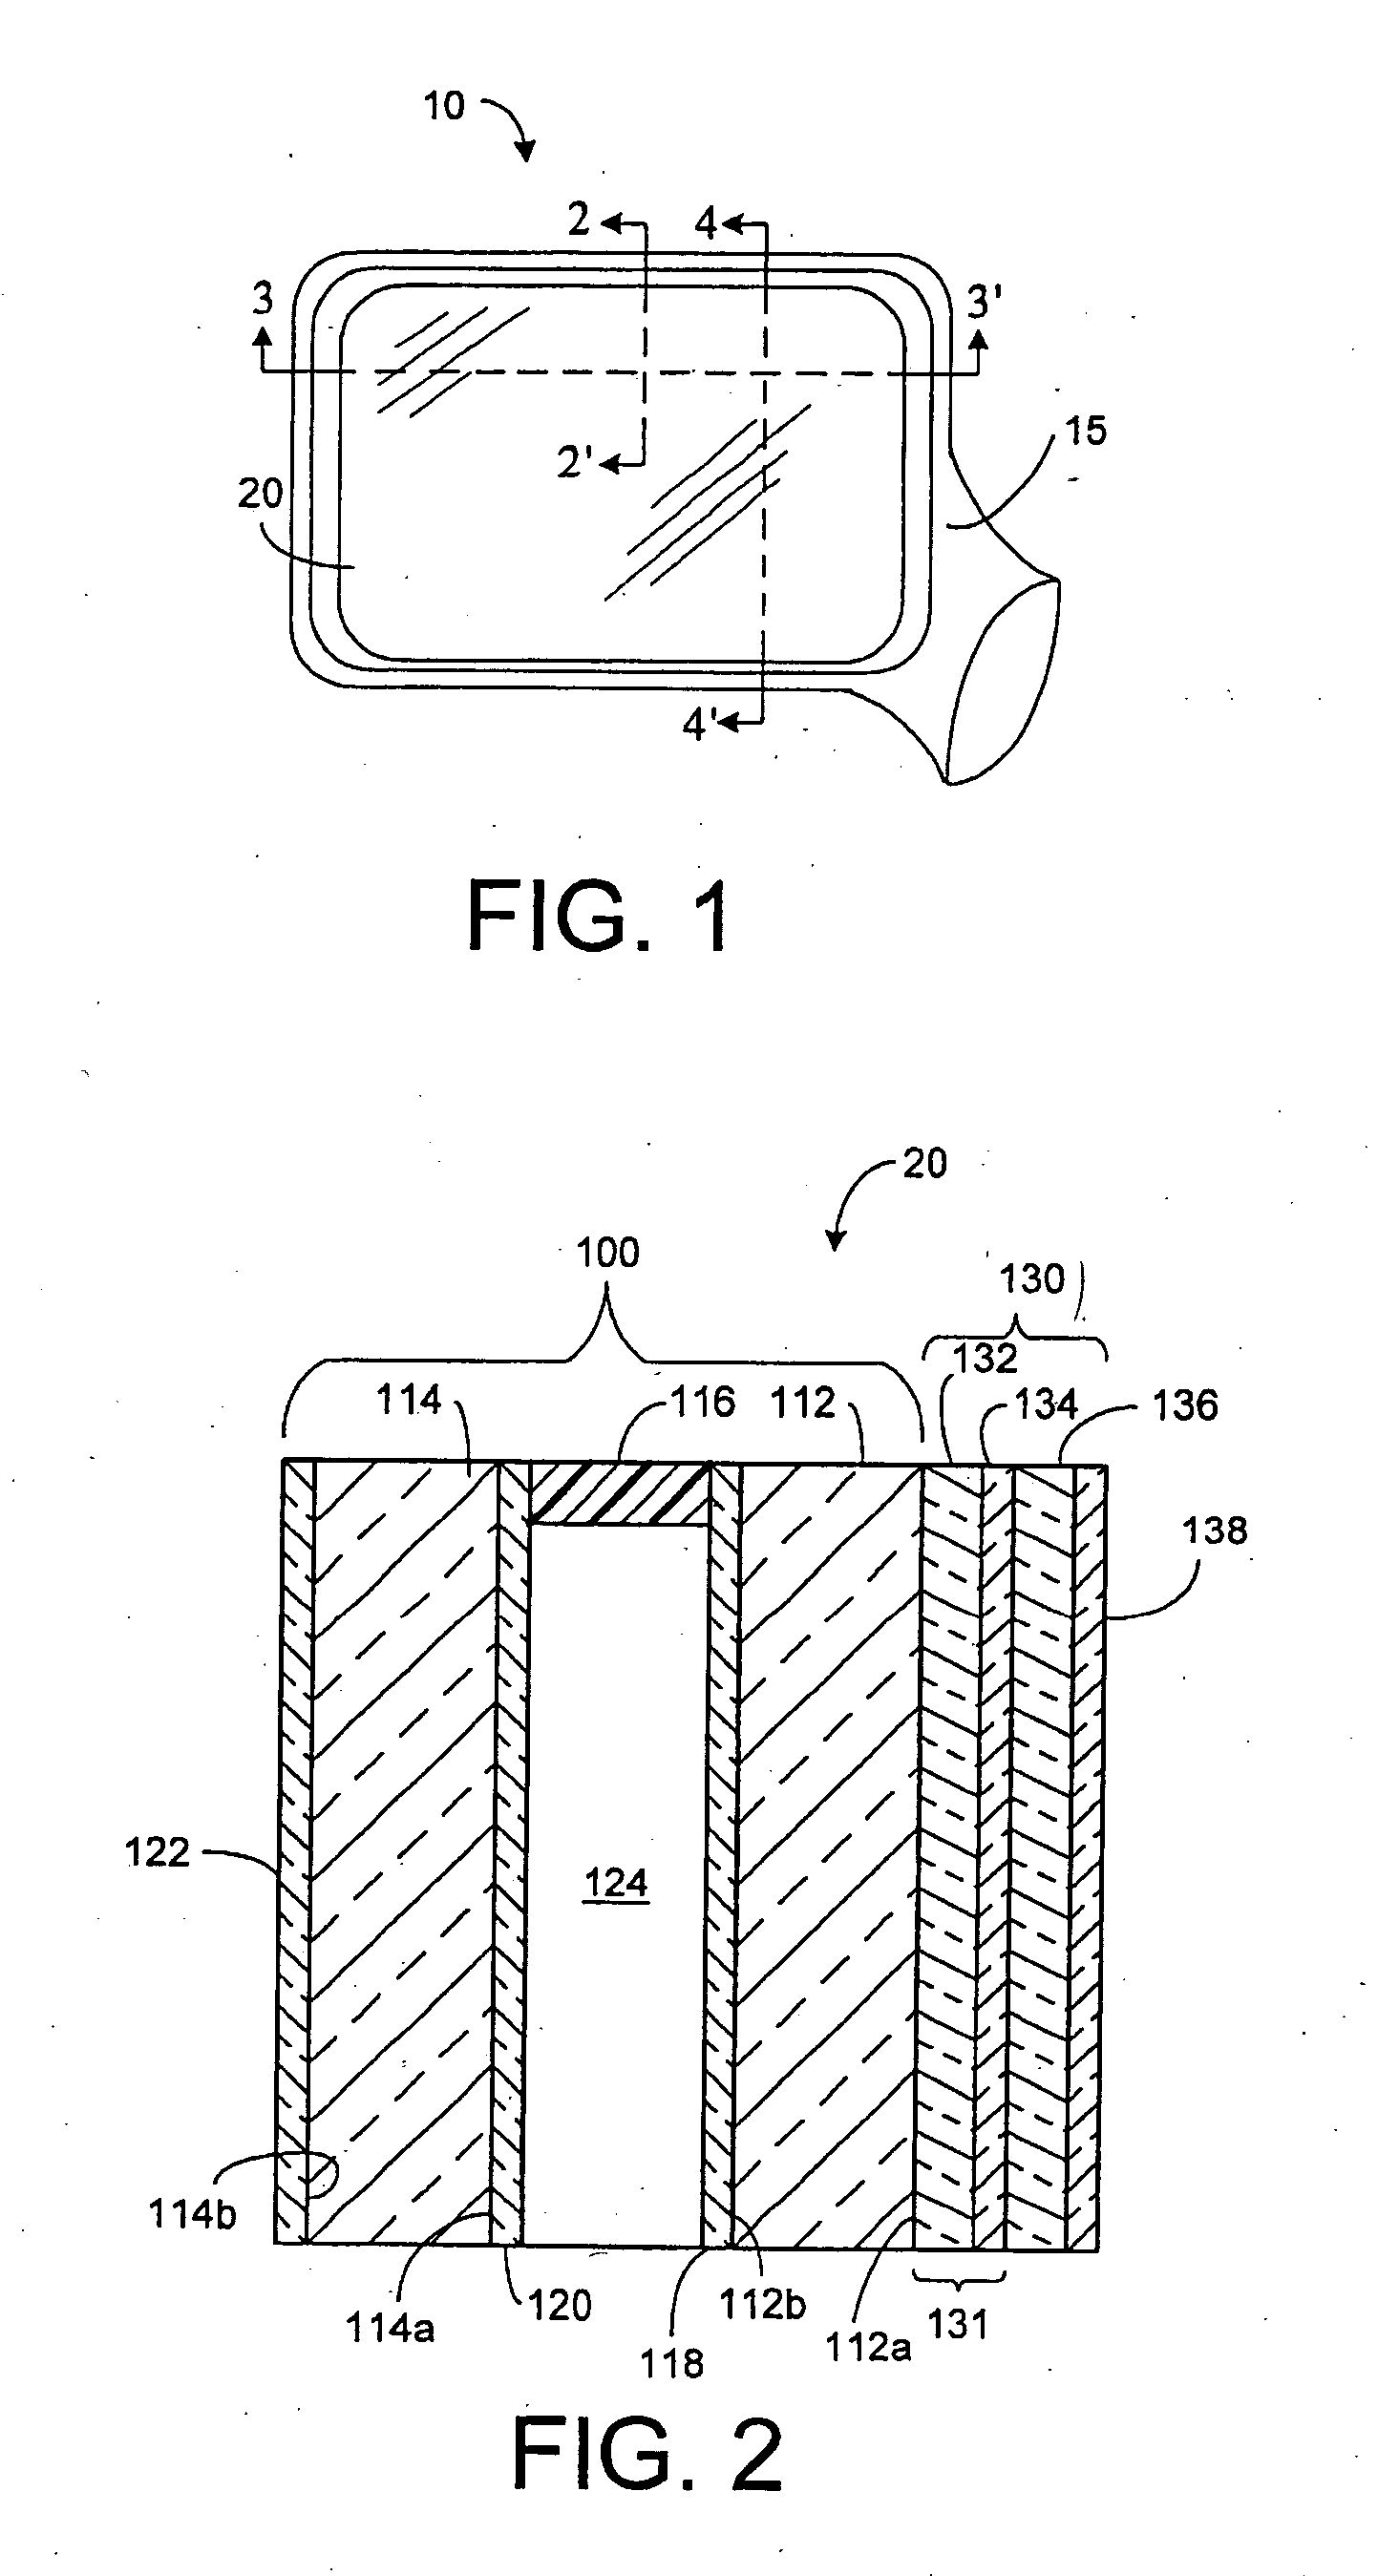 Electrochromic device having a self-cleaning hydrophilic coating with a controlled surface morphology